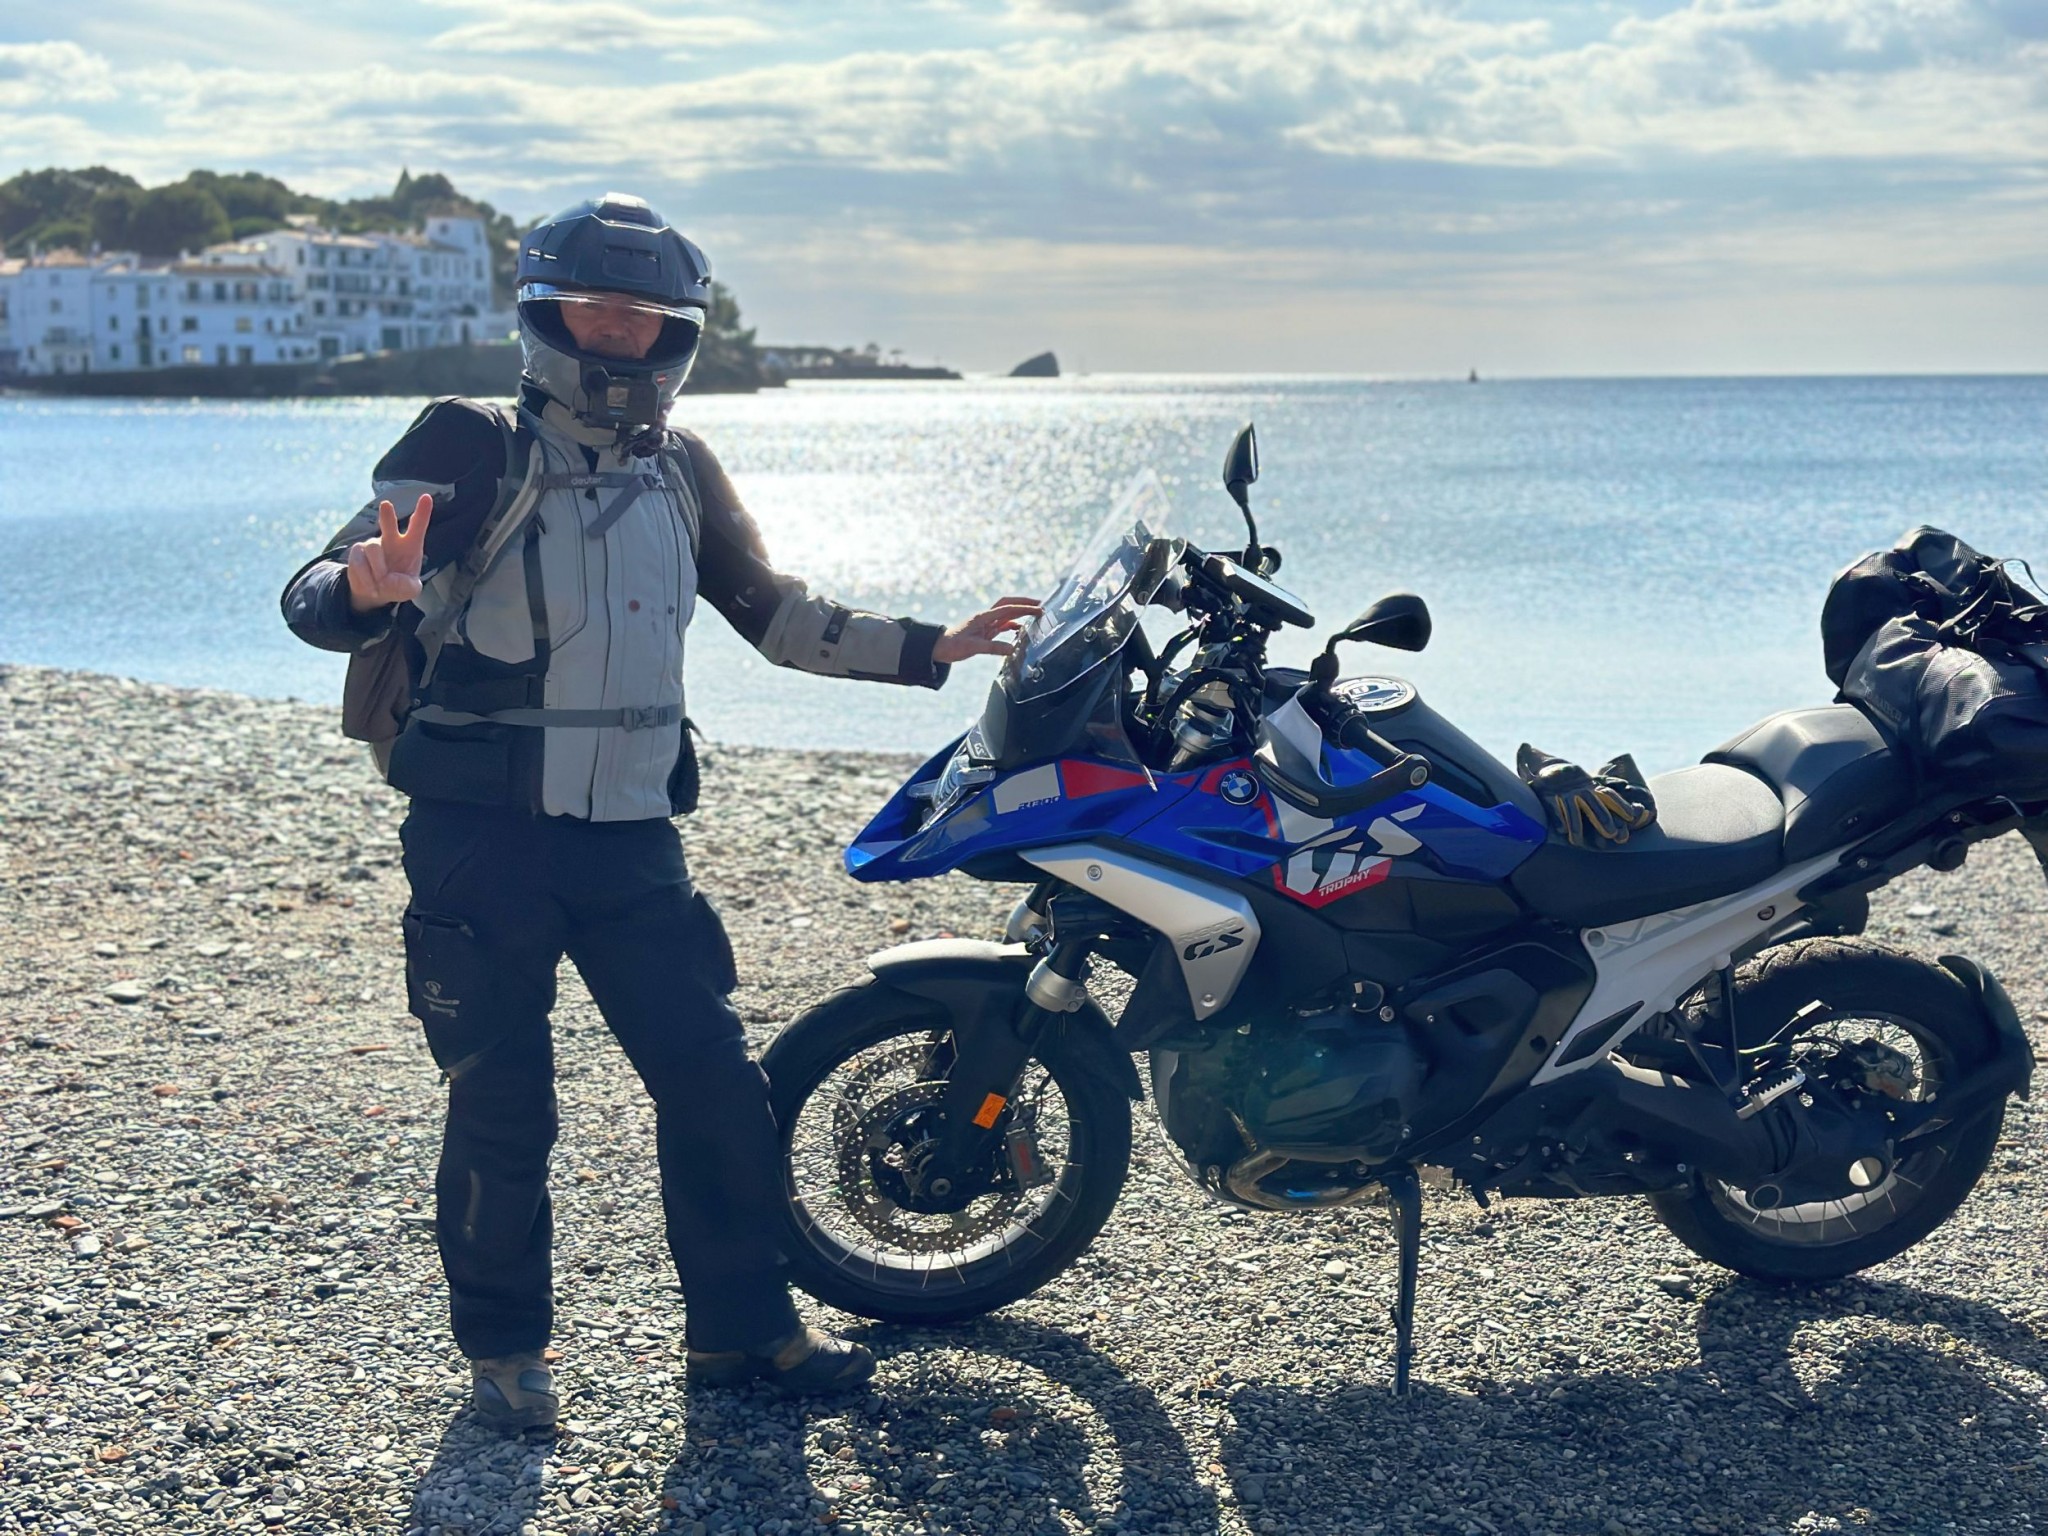 BMW R 1300 GS road test - from Barcelona to Vienna - Image 4